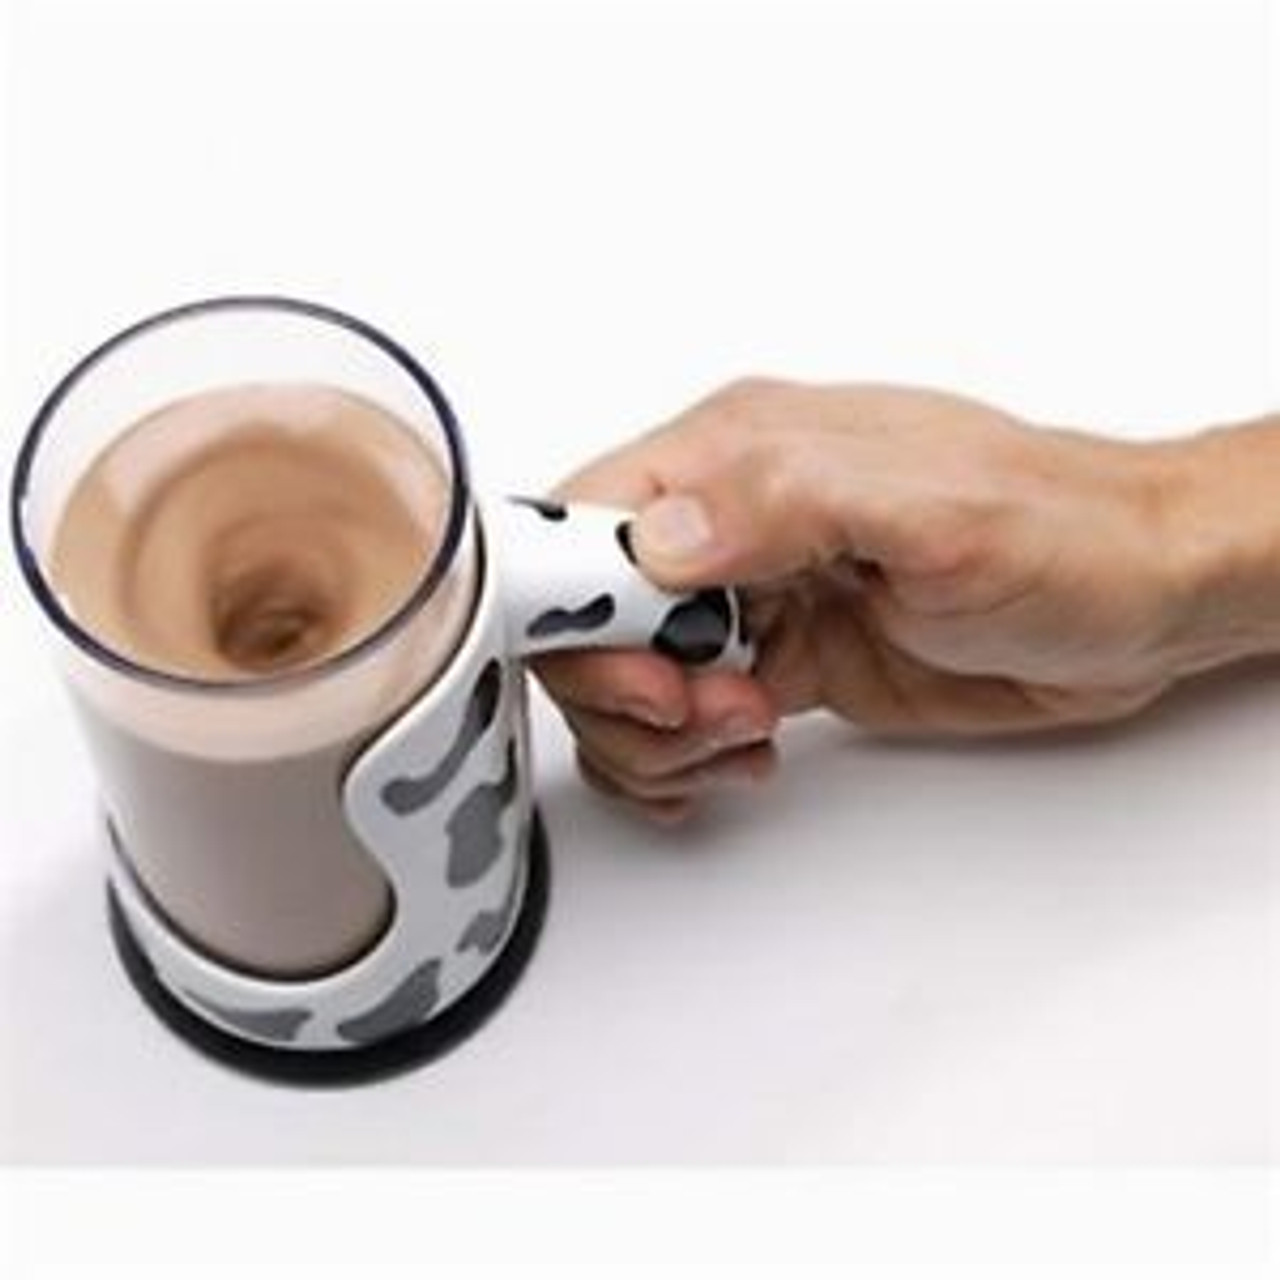 Moo Mixer, Other